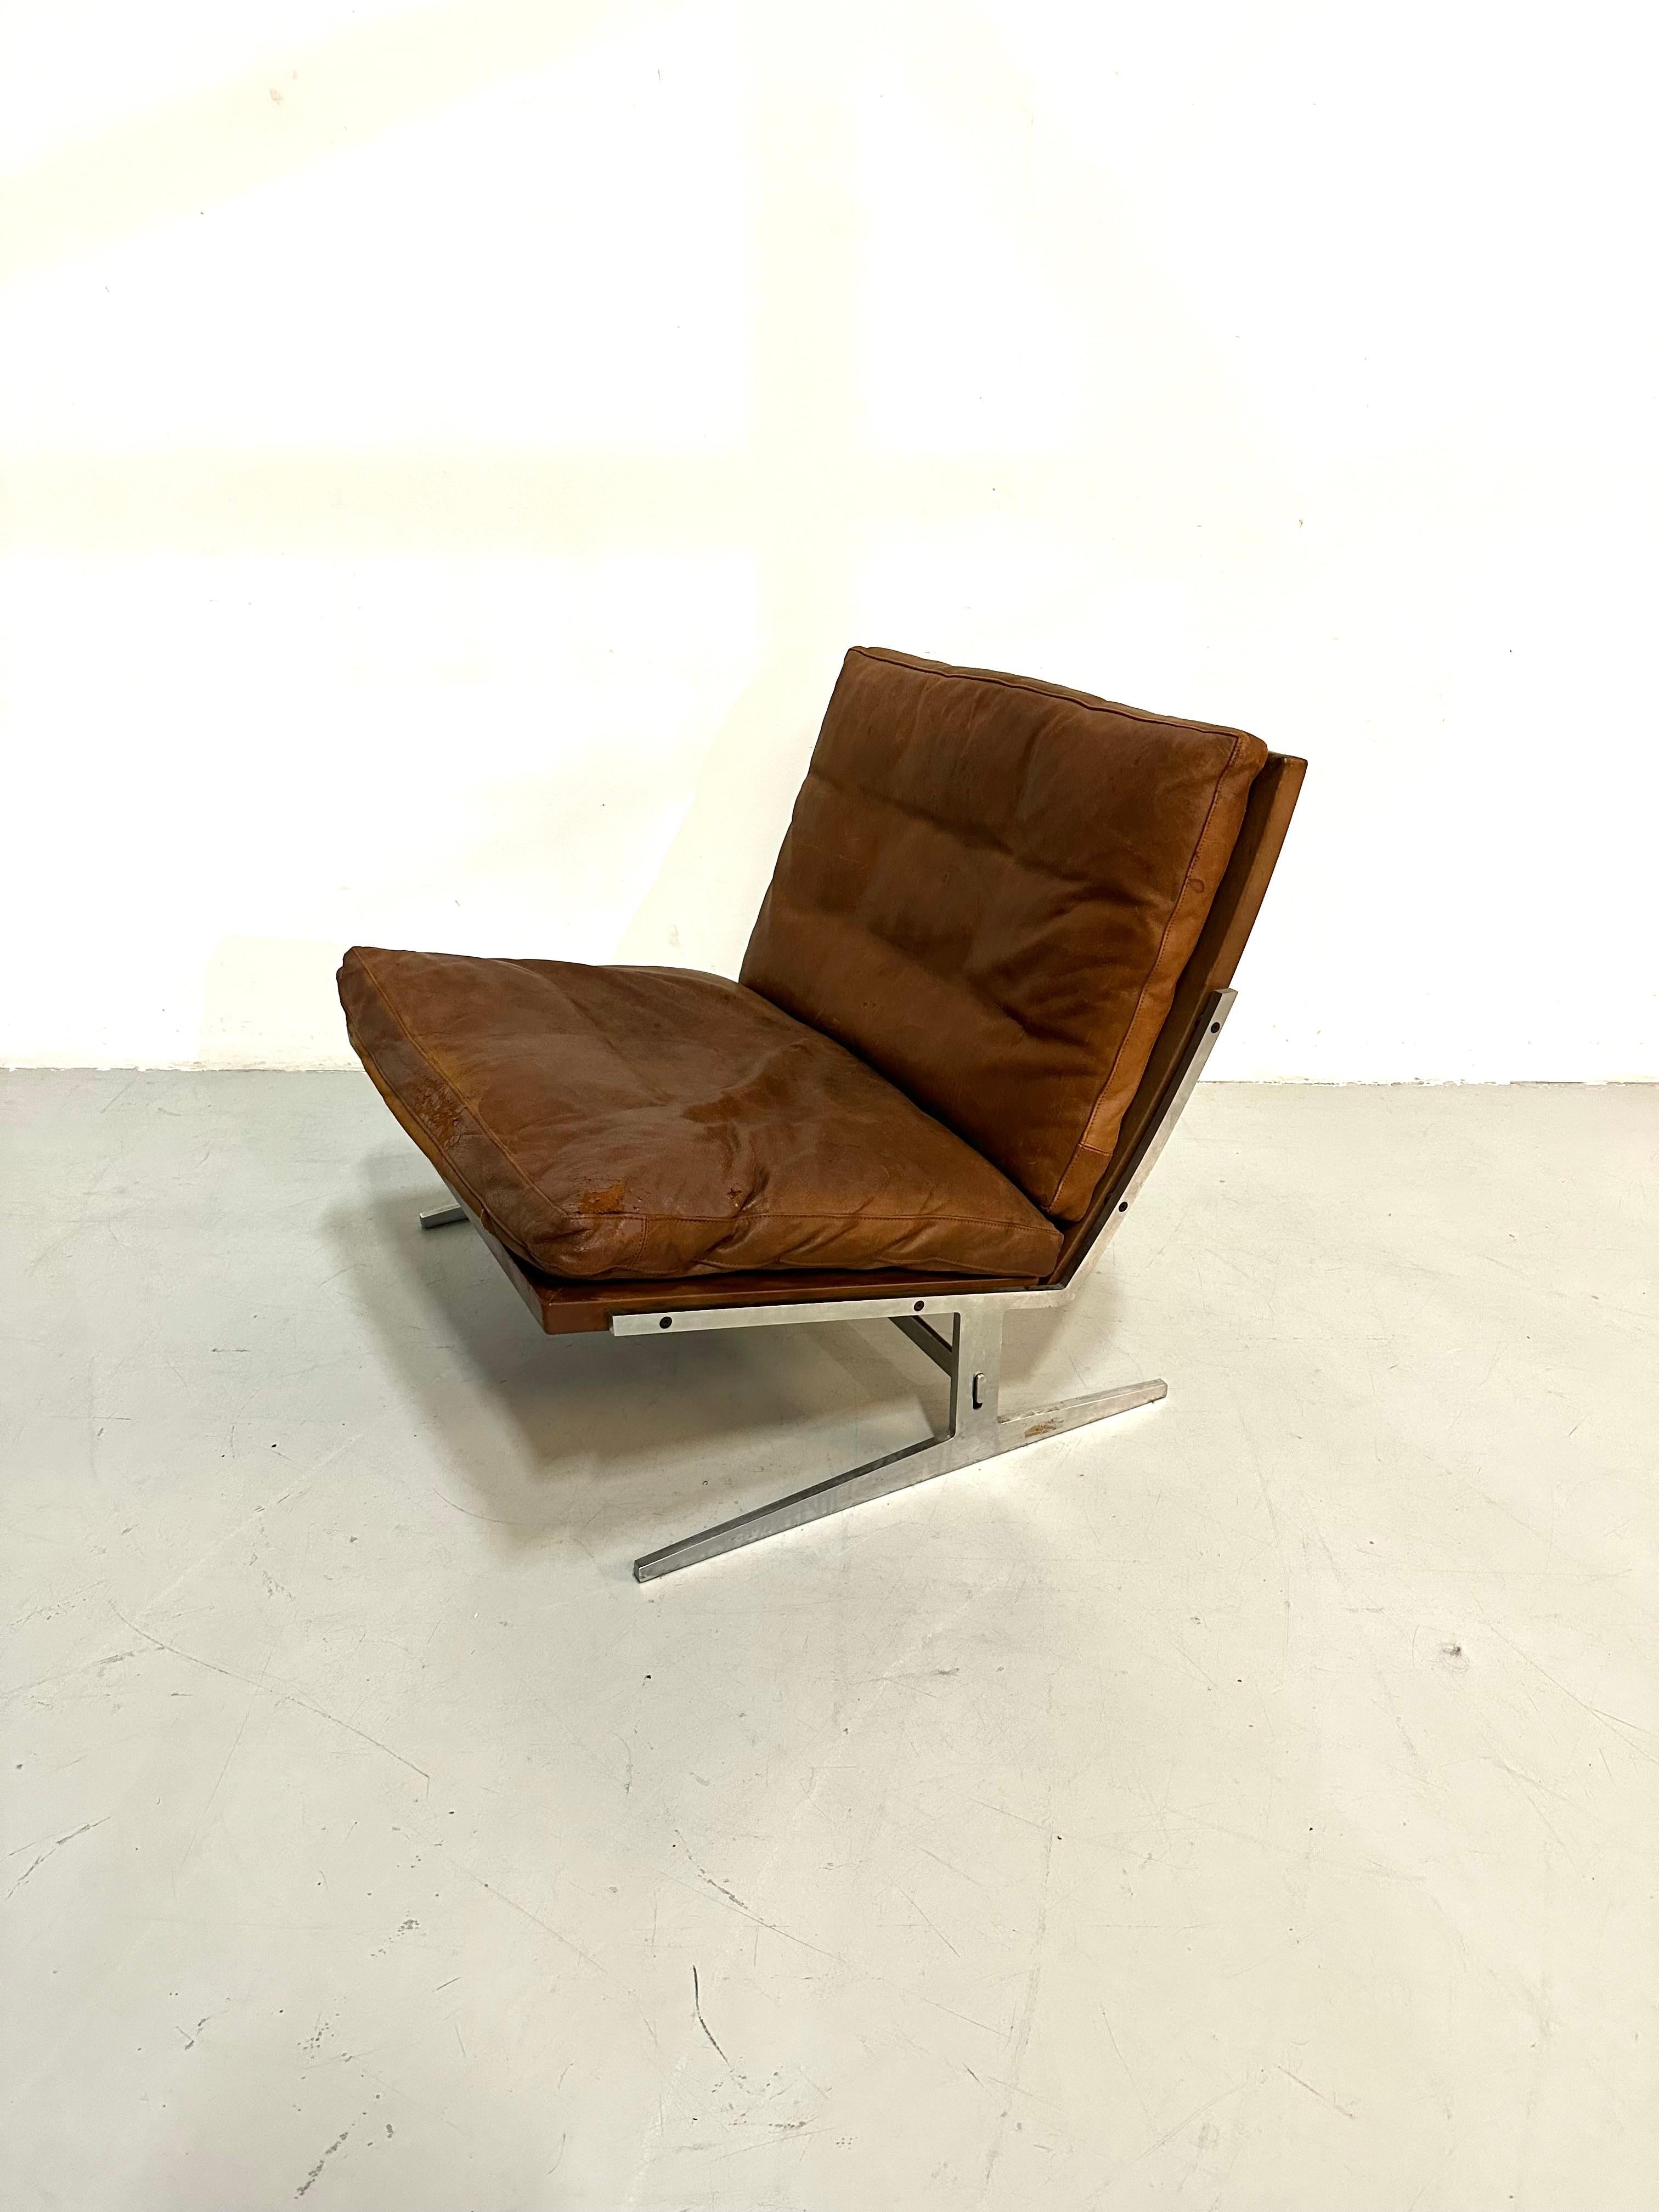 This BO-561 Lounge chair is designed by Preben Juhl Fabricius and Jorgen Kastholm in the sixties. 
The 2 Danish designers met each other in the 50s but start only working together in the 60s. While Fabricius was an educated cabinetmaker , it was